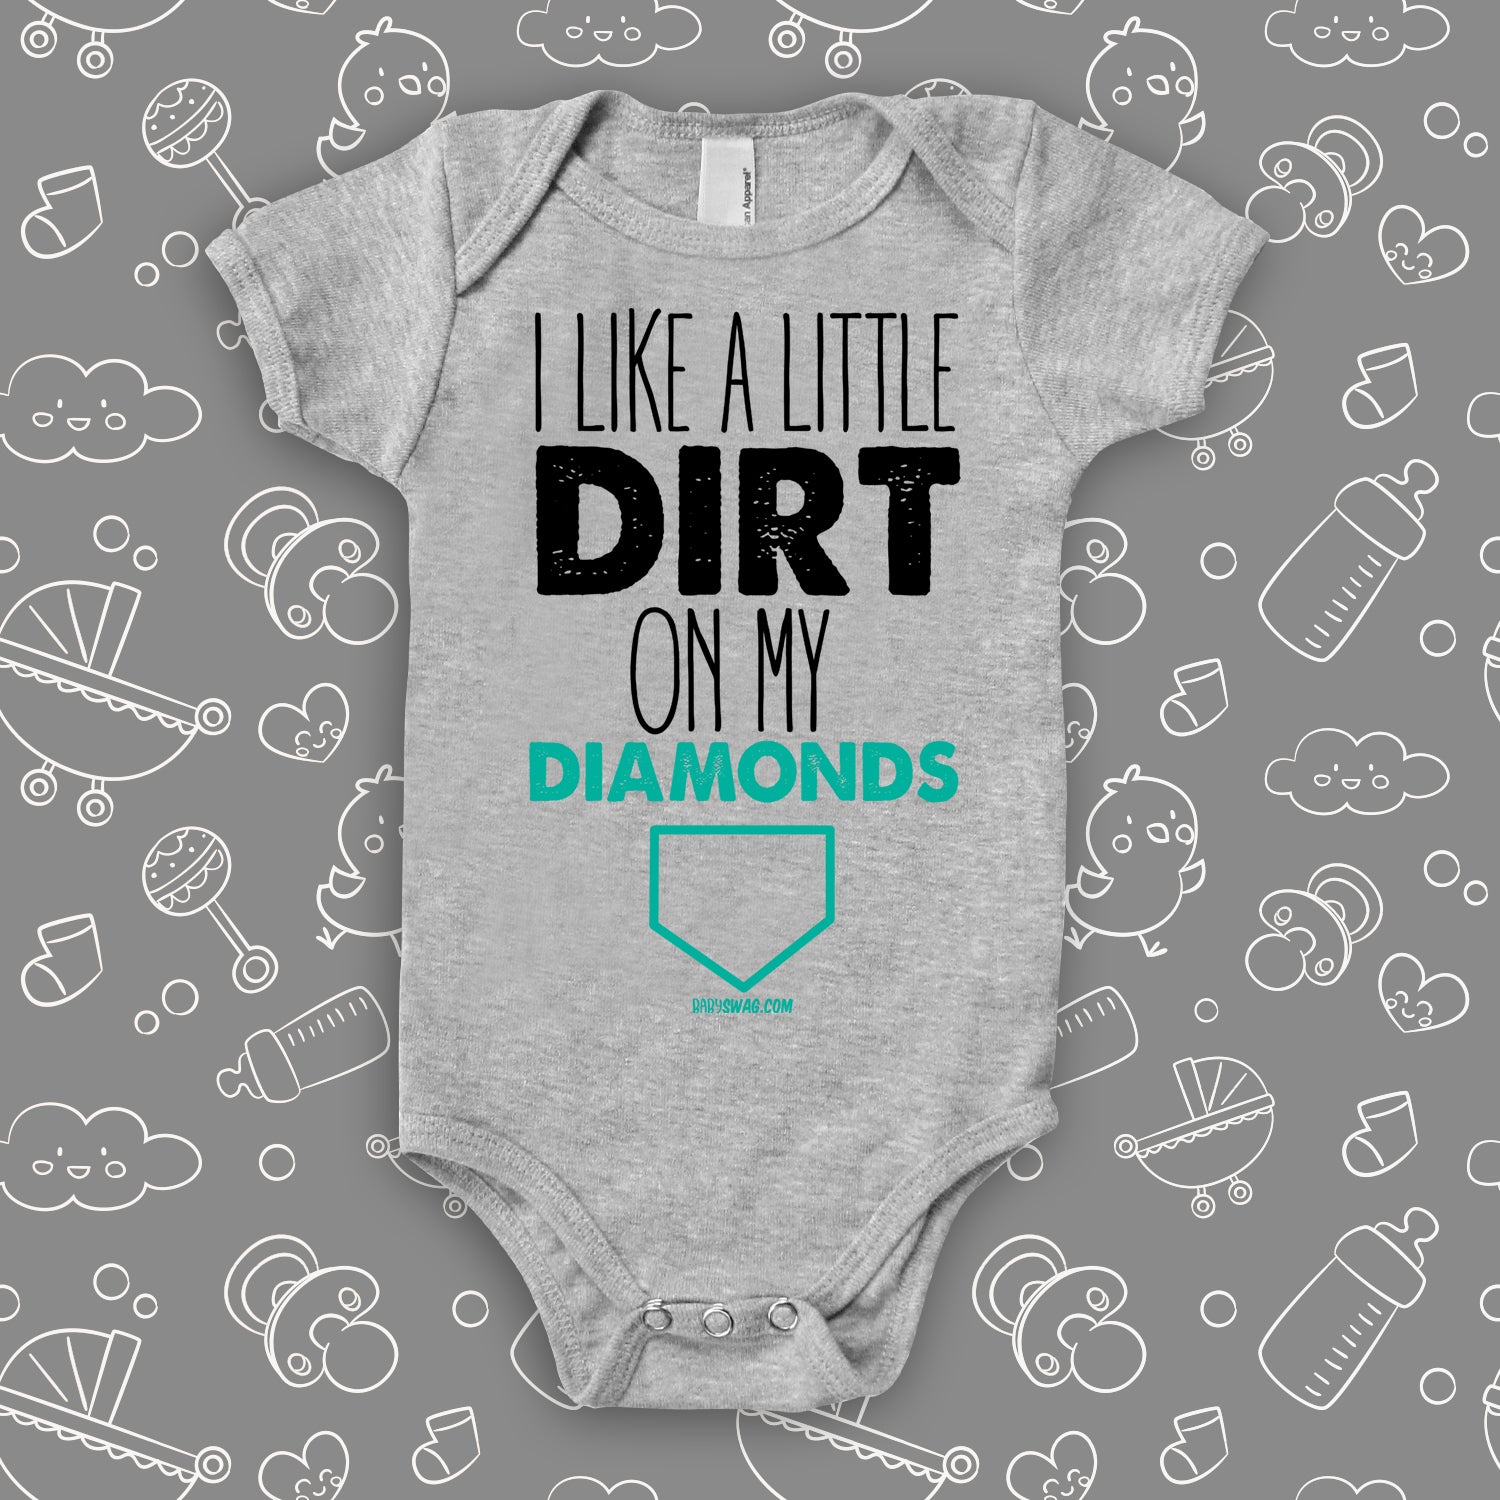 Cute baby boy onesies with saying "I Like A Little Dirt On My Diamonds" in grey.